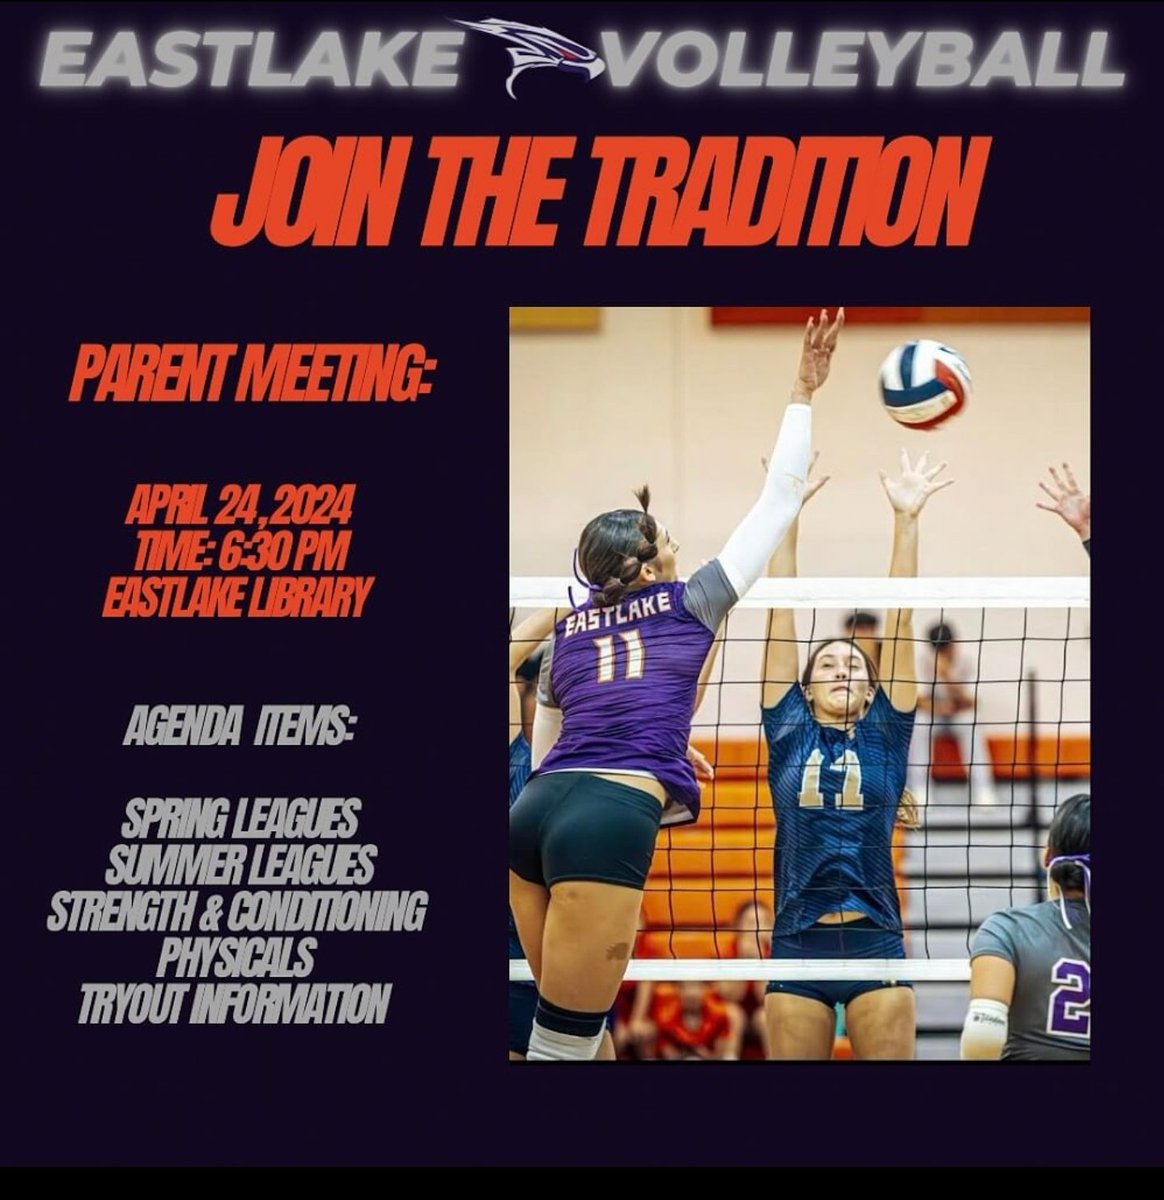 This Wednesday, @Eastlake_Vball will be hosting a parent meeting for any incoming freshman, transfer students, and students who were not on the team last year or did not try out and would like to try out this upcoming season. We look forward to seeing everyone on Wednesday!